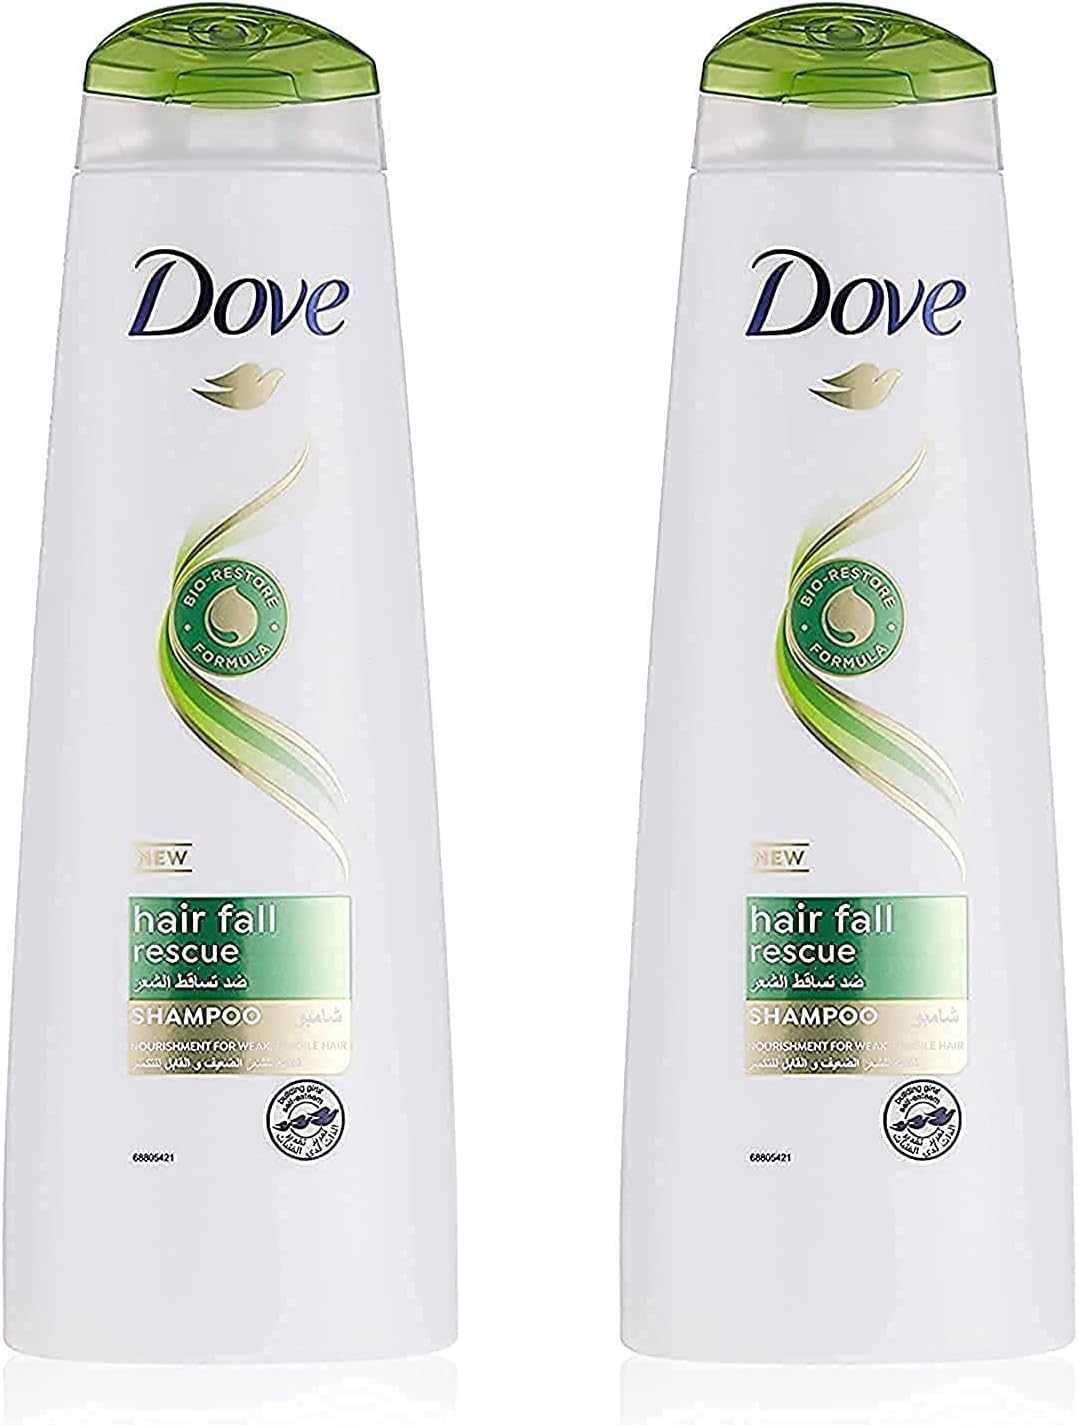 Dove Shampoo for Weak and Fragile Hair, Hair Fall Rescue, Nourishing Care for up to 98 percent less Hair Fall (400ml x 2)